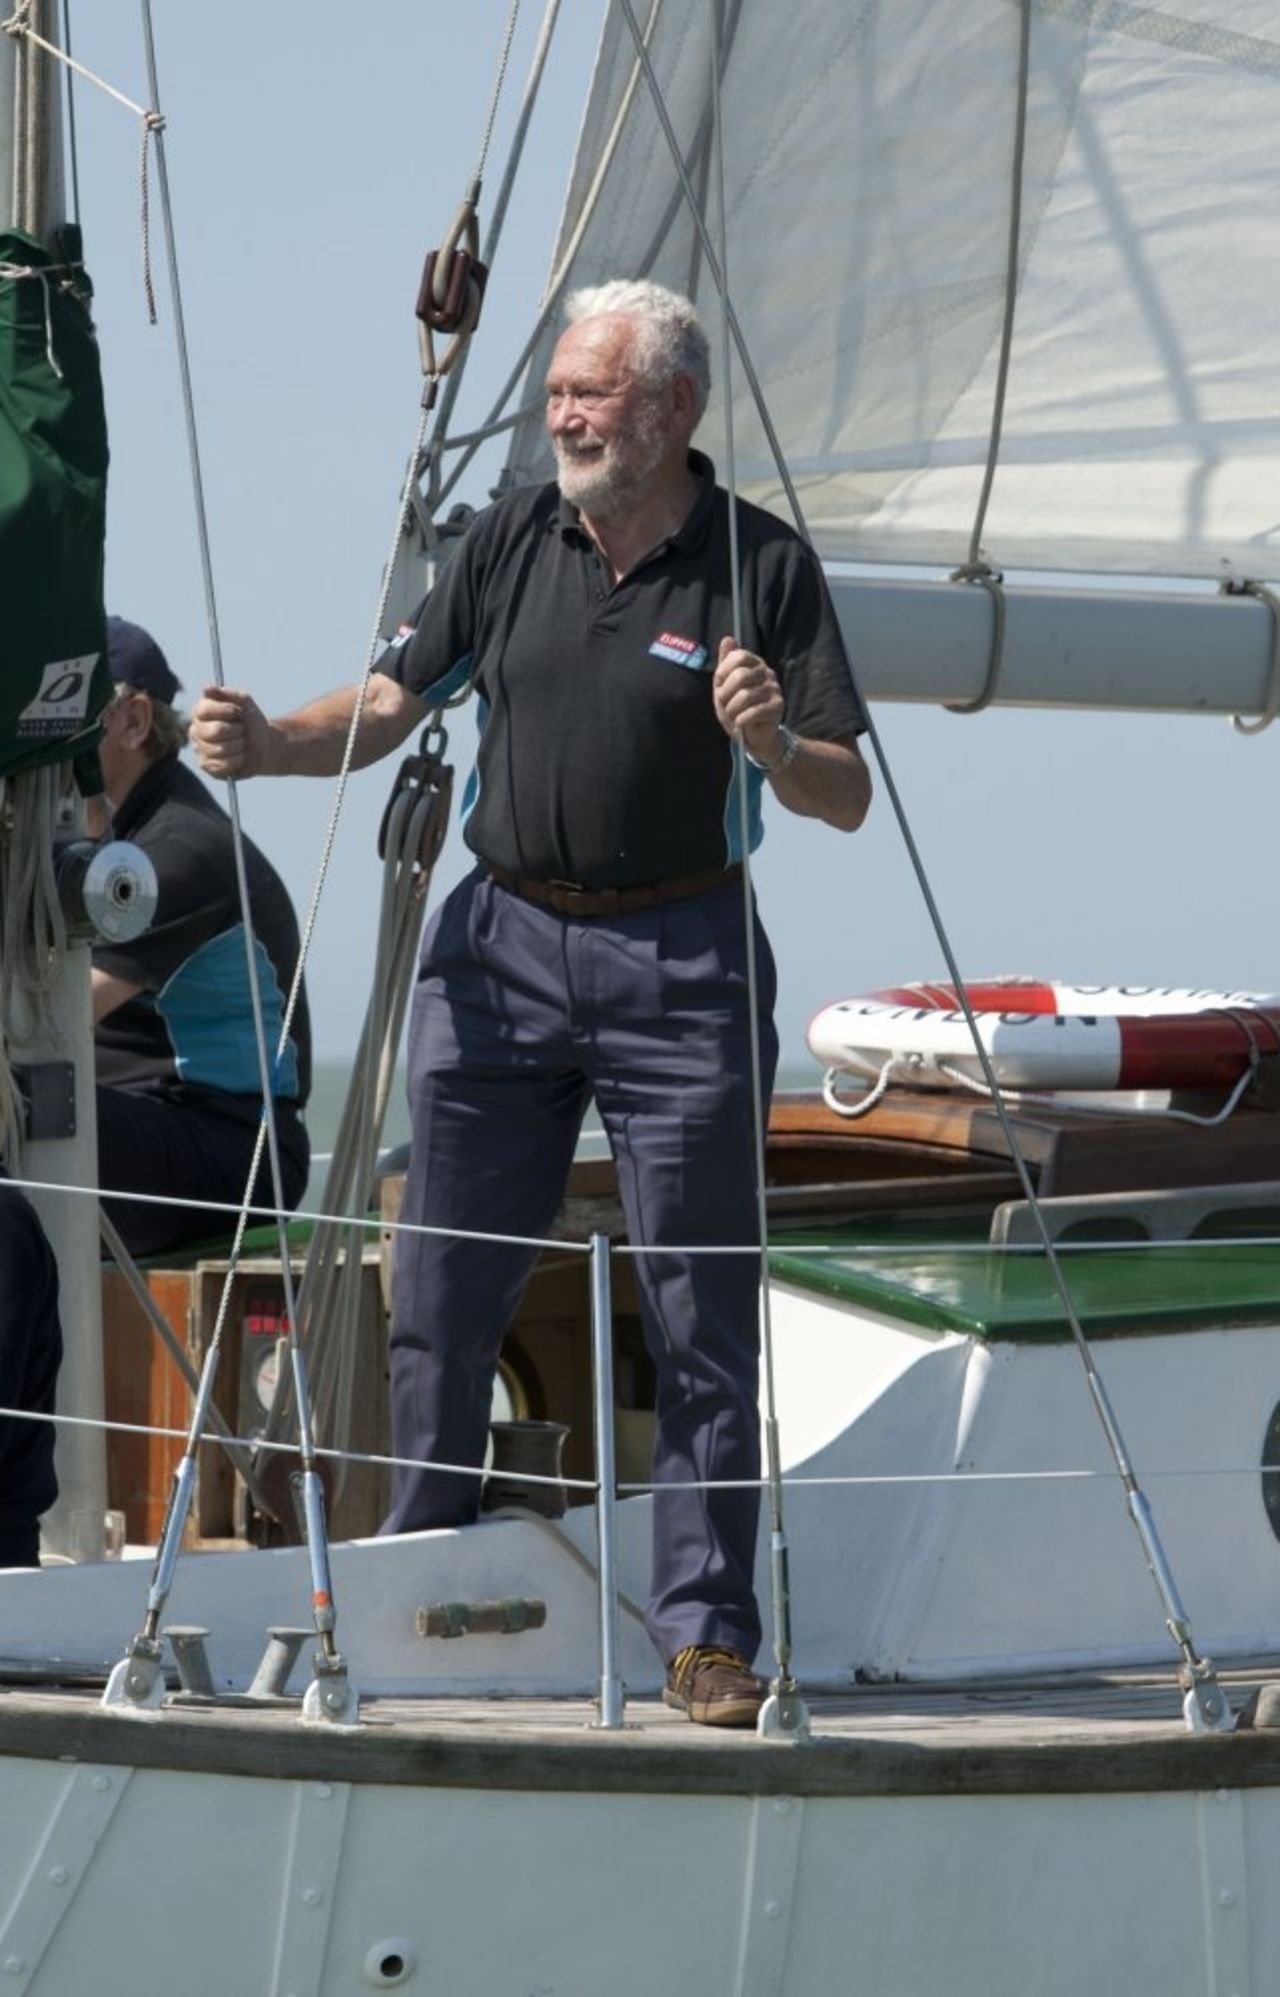 Sir Robin Knox-Johnston, the first person to sail solo, non-stop, around the world in 1969, founded the annual clipper race 16 years ago. 